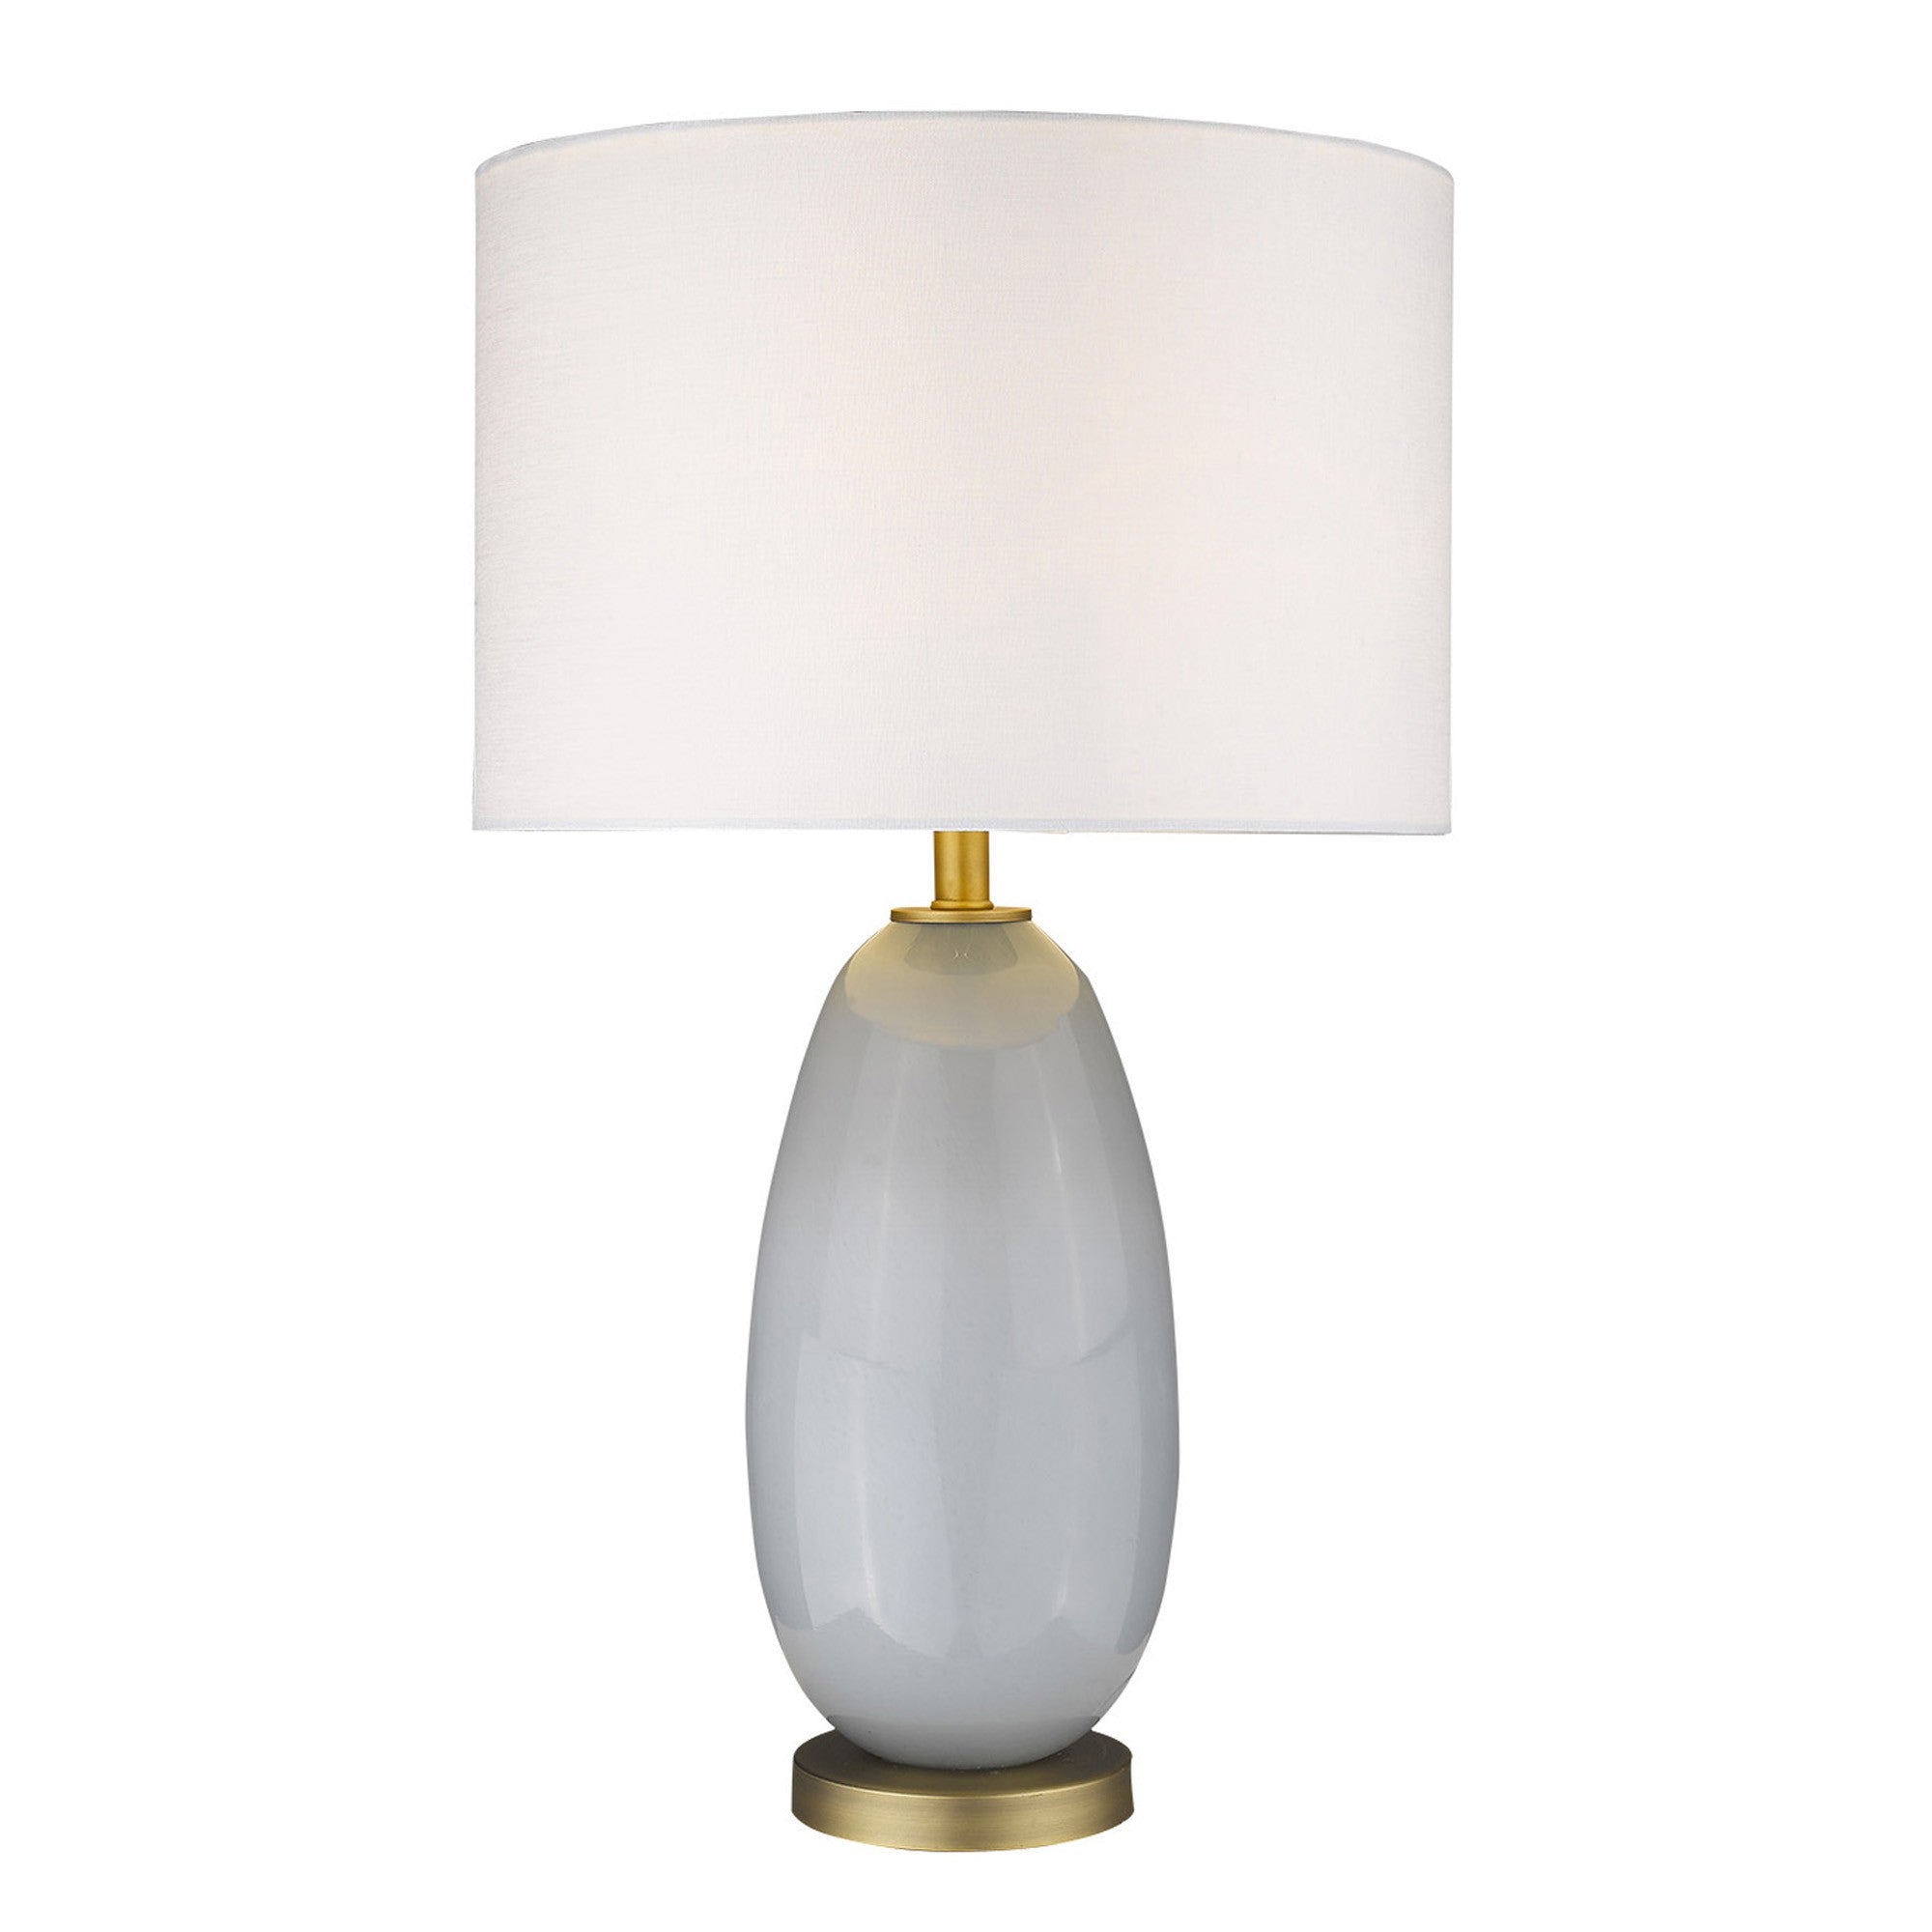 29" Brass Metal Column Table Lamp With White Drum Shade